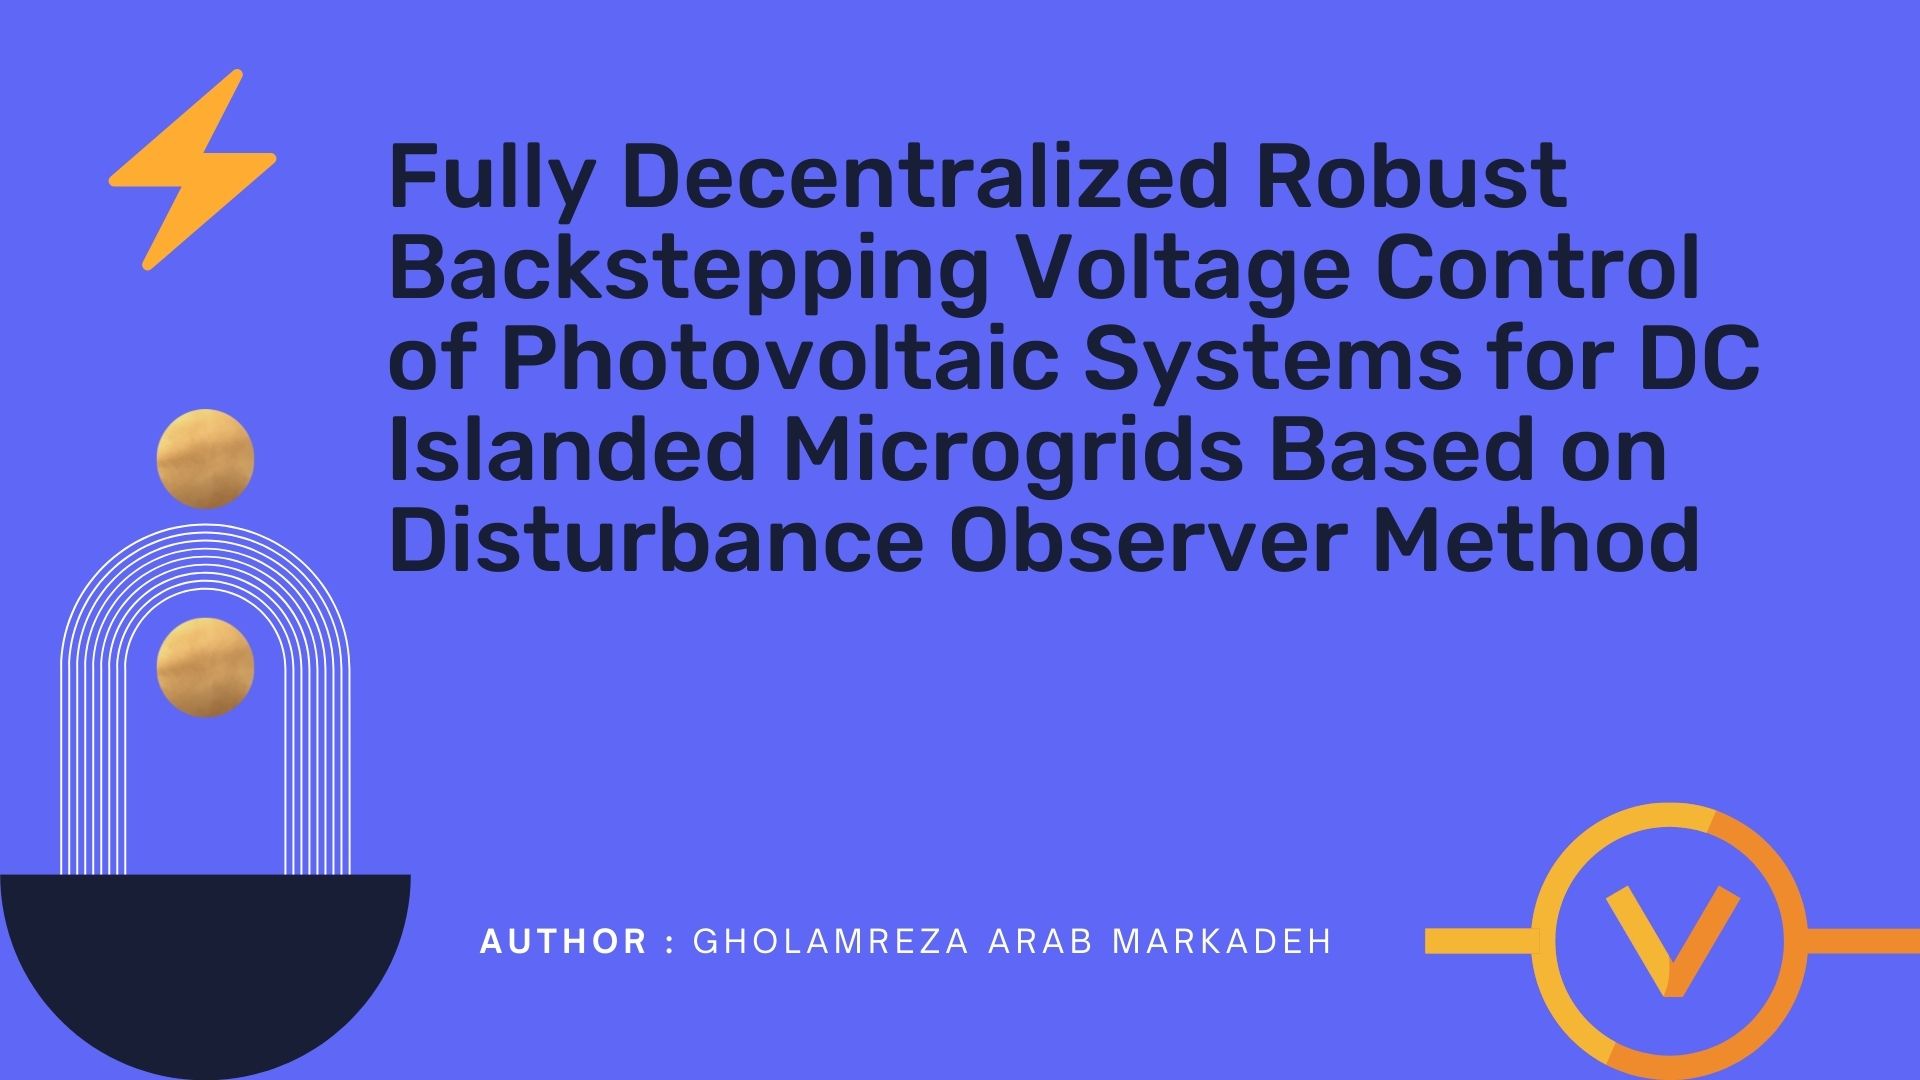 Fully Decentralized Robust Backstepping Voltage Control of Photovoltaic Systems for DC Islanded Microgrids Based on Disturbance Observer Method